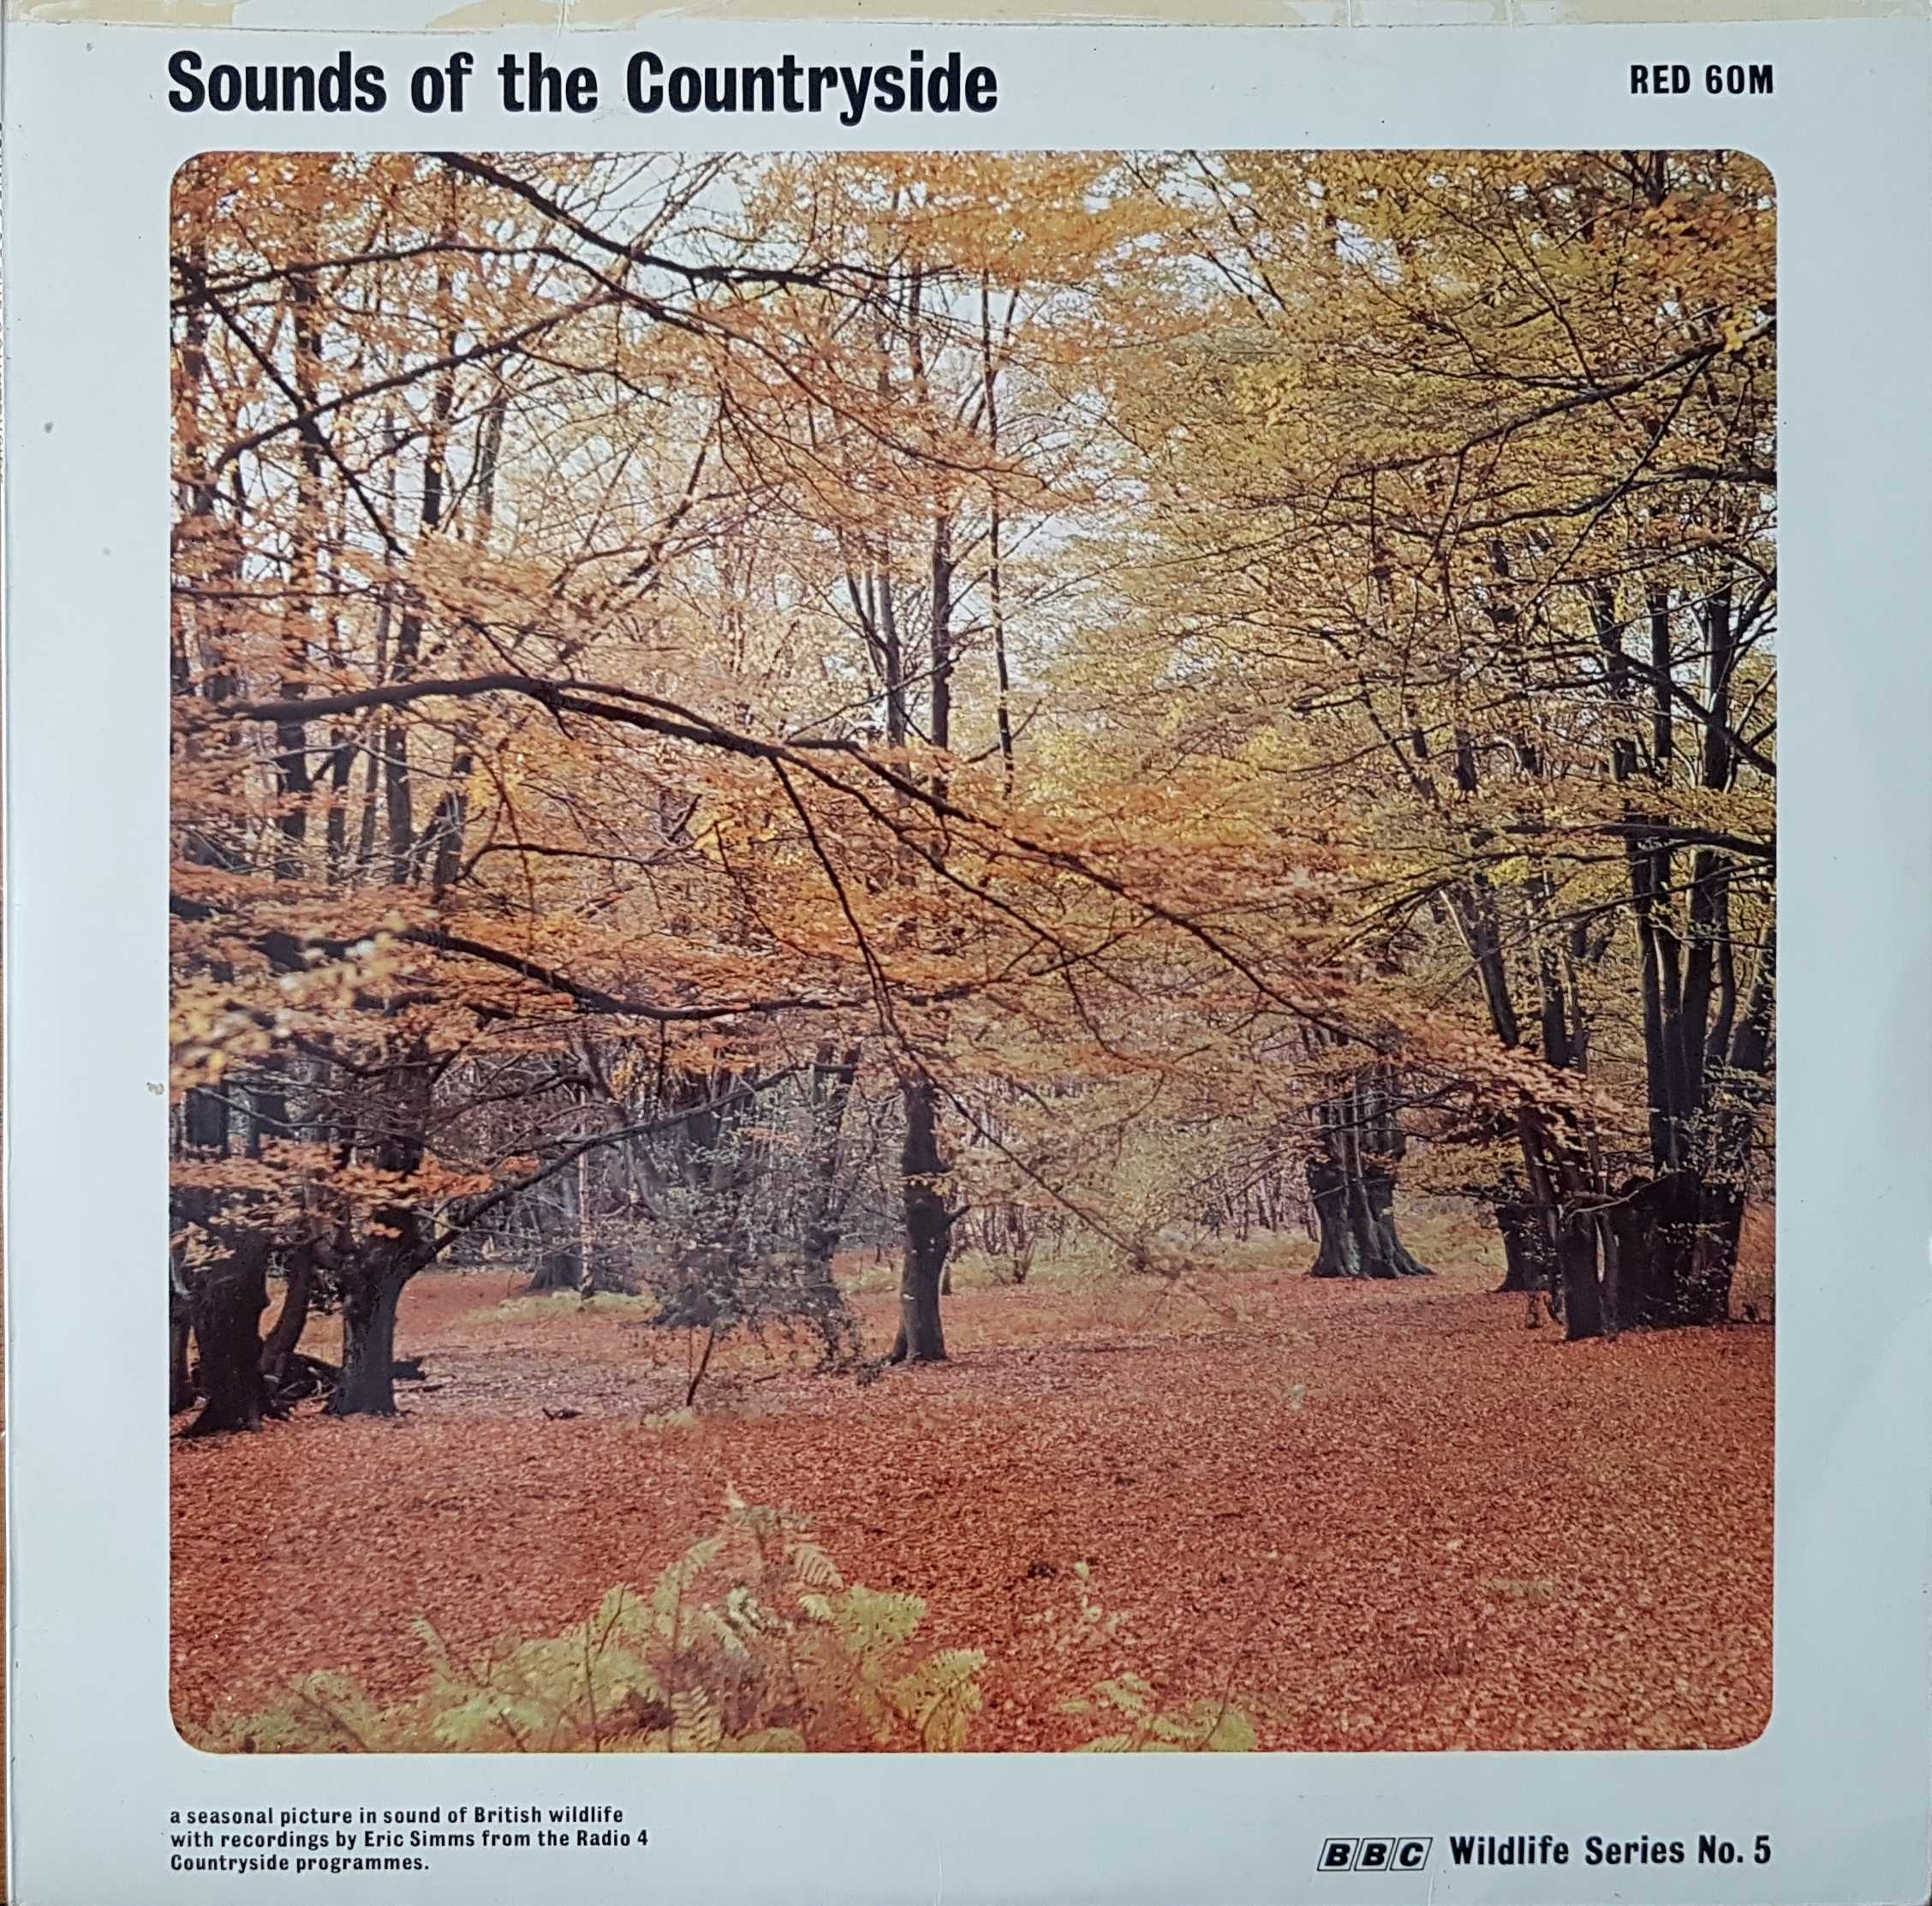 Picture of RED 60 Sound of the countryside - BBC wildlife series no. 5 by artist Various from the BBC albums - Records and Tapes library